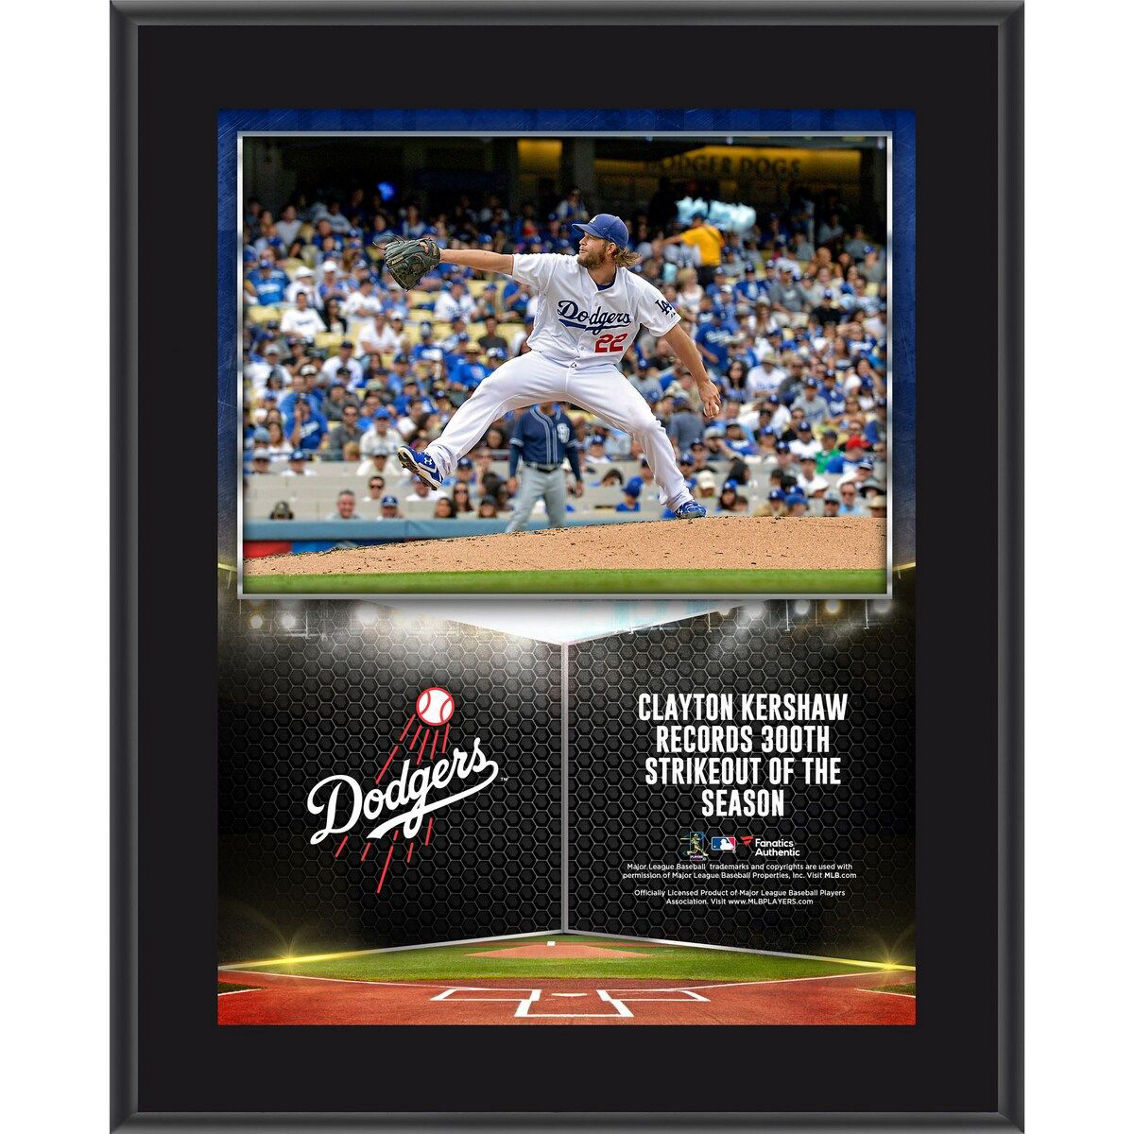 Fanatics Authentic Clayton Kershaw Los Angeles Dodgers 10.5'' x 13'' 300 Strikeouts in a Season Sublimated Plaque - Image 2 of 2